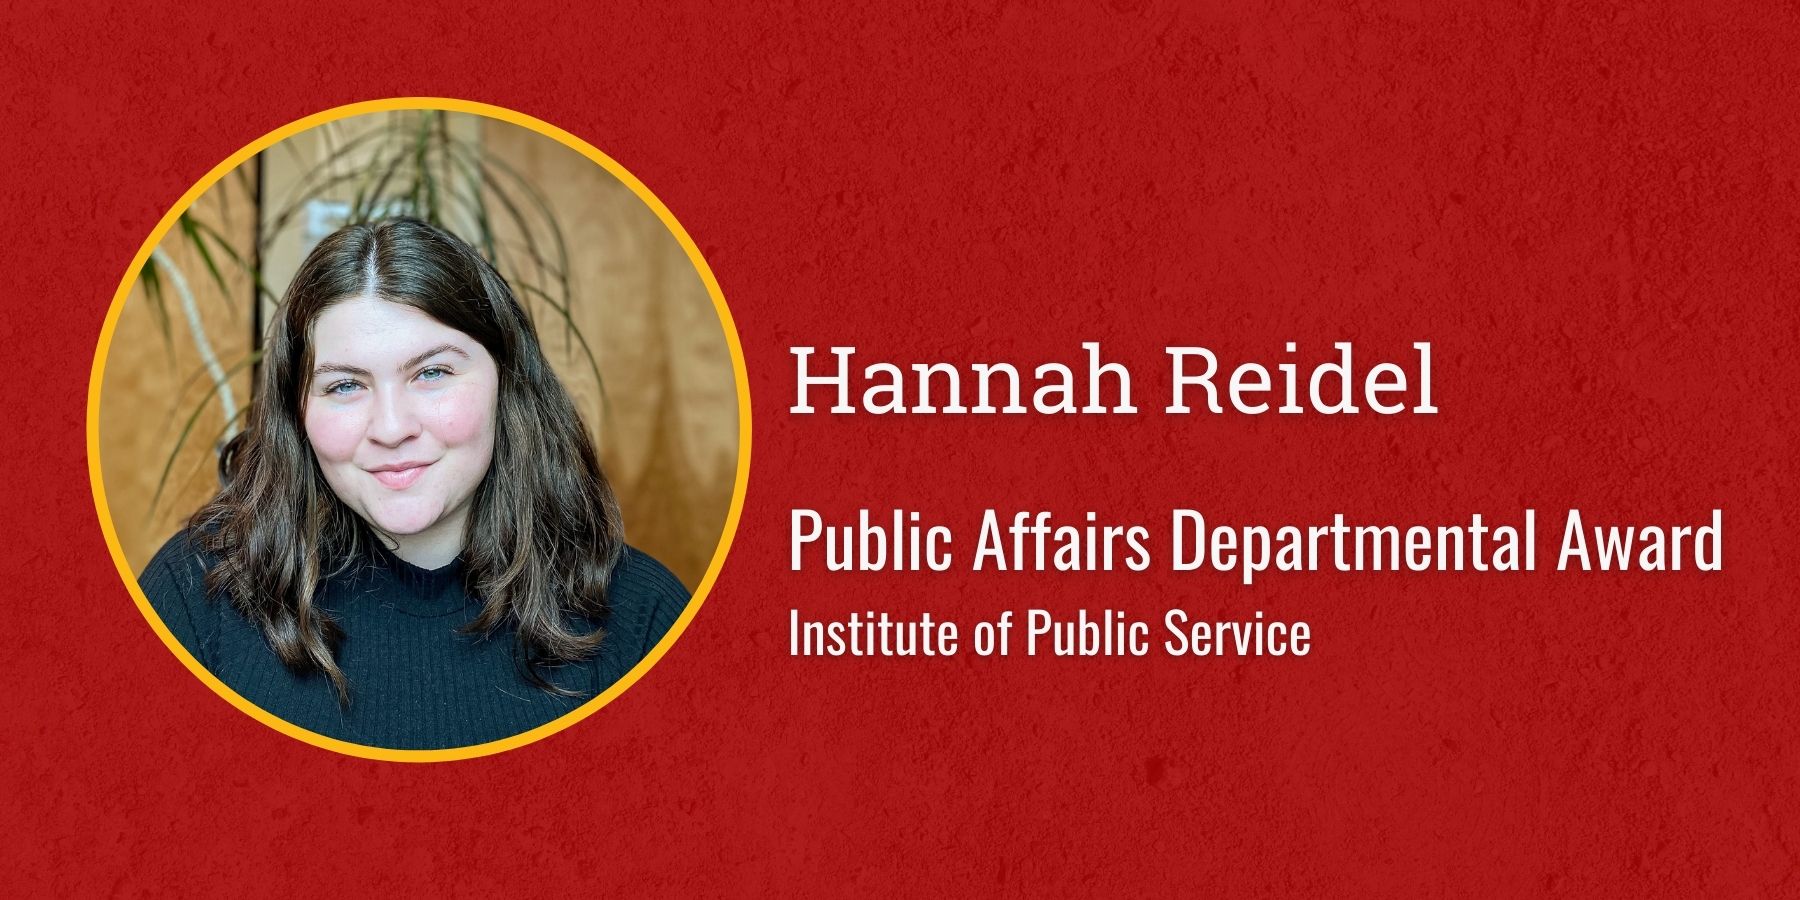 photo of Hannah Reidel and text